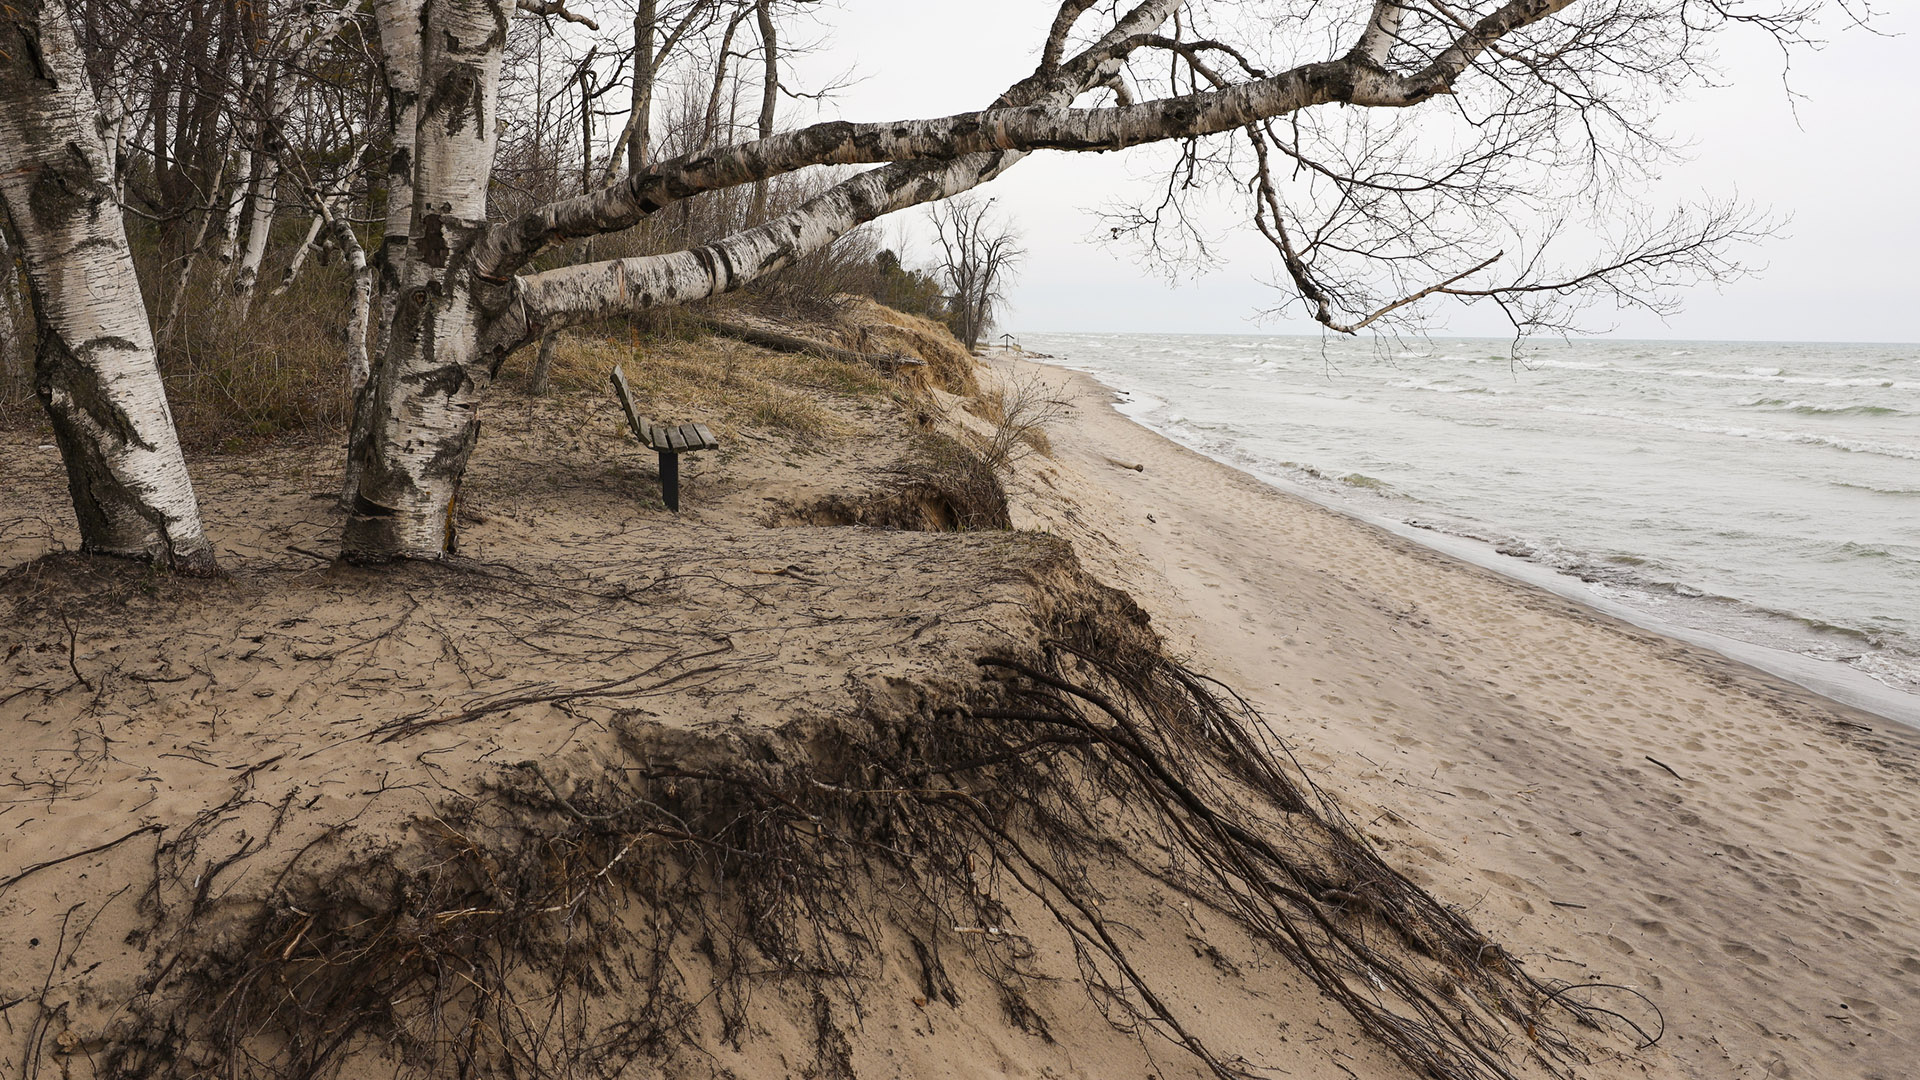 A park bench stands at the edge of a low sandy bluff, with leafless trees on its inland side and a short slope with exposed roots above a narrow beach next to a body of water extending to the horizon.